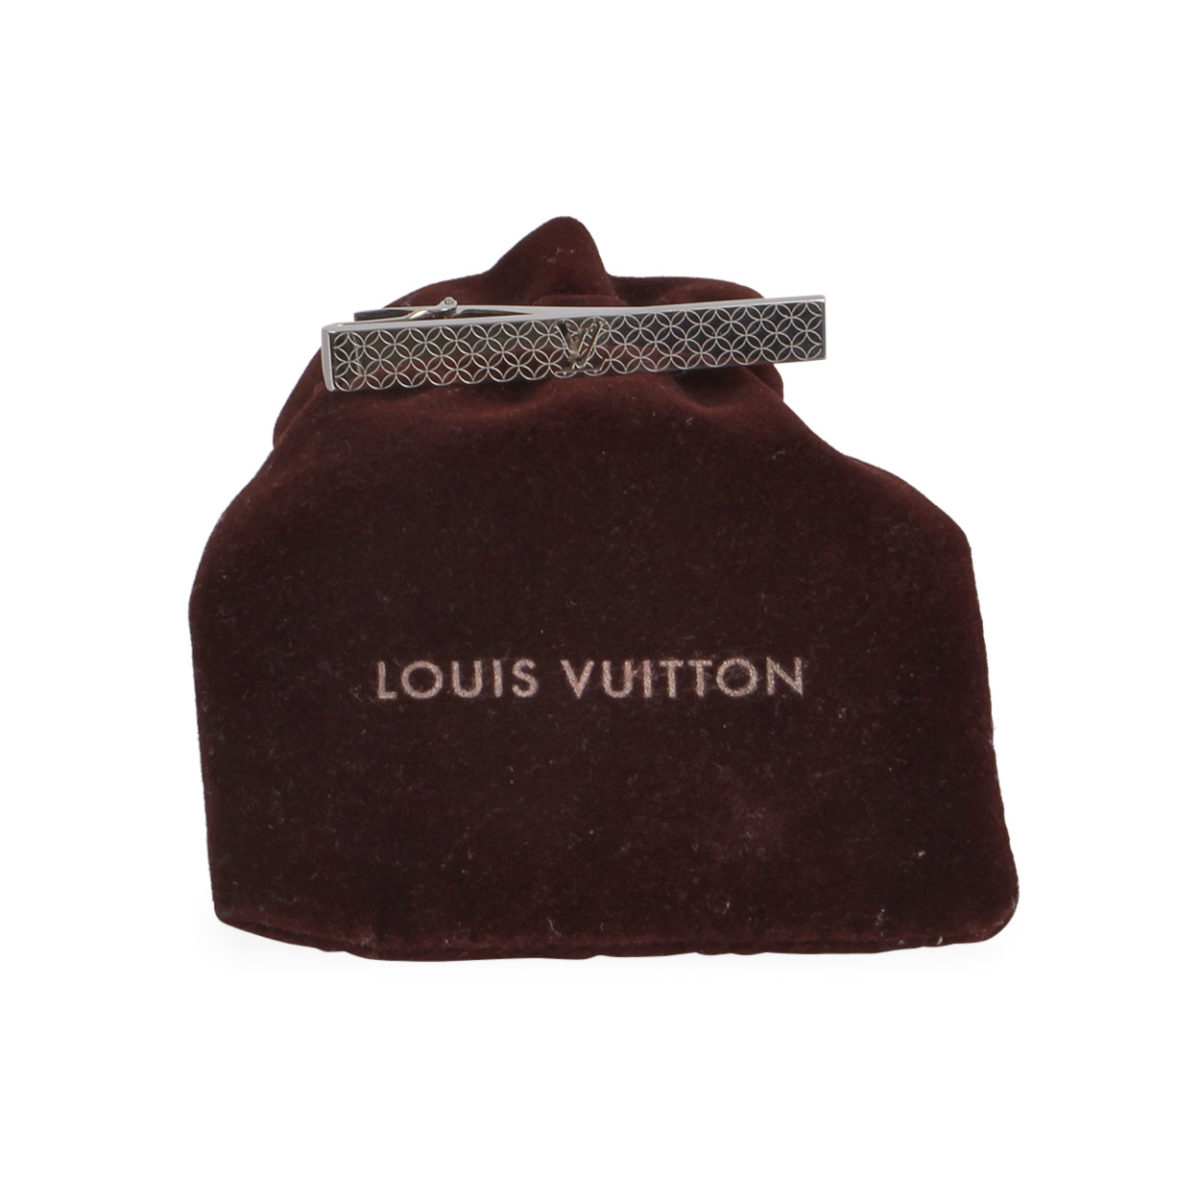 LOUIS VUITTON Champs Elysees Tie Pin Silver | Luxity